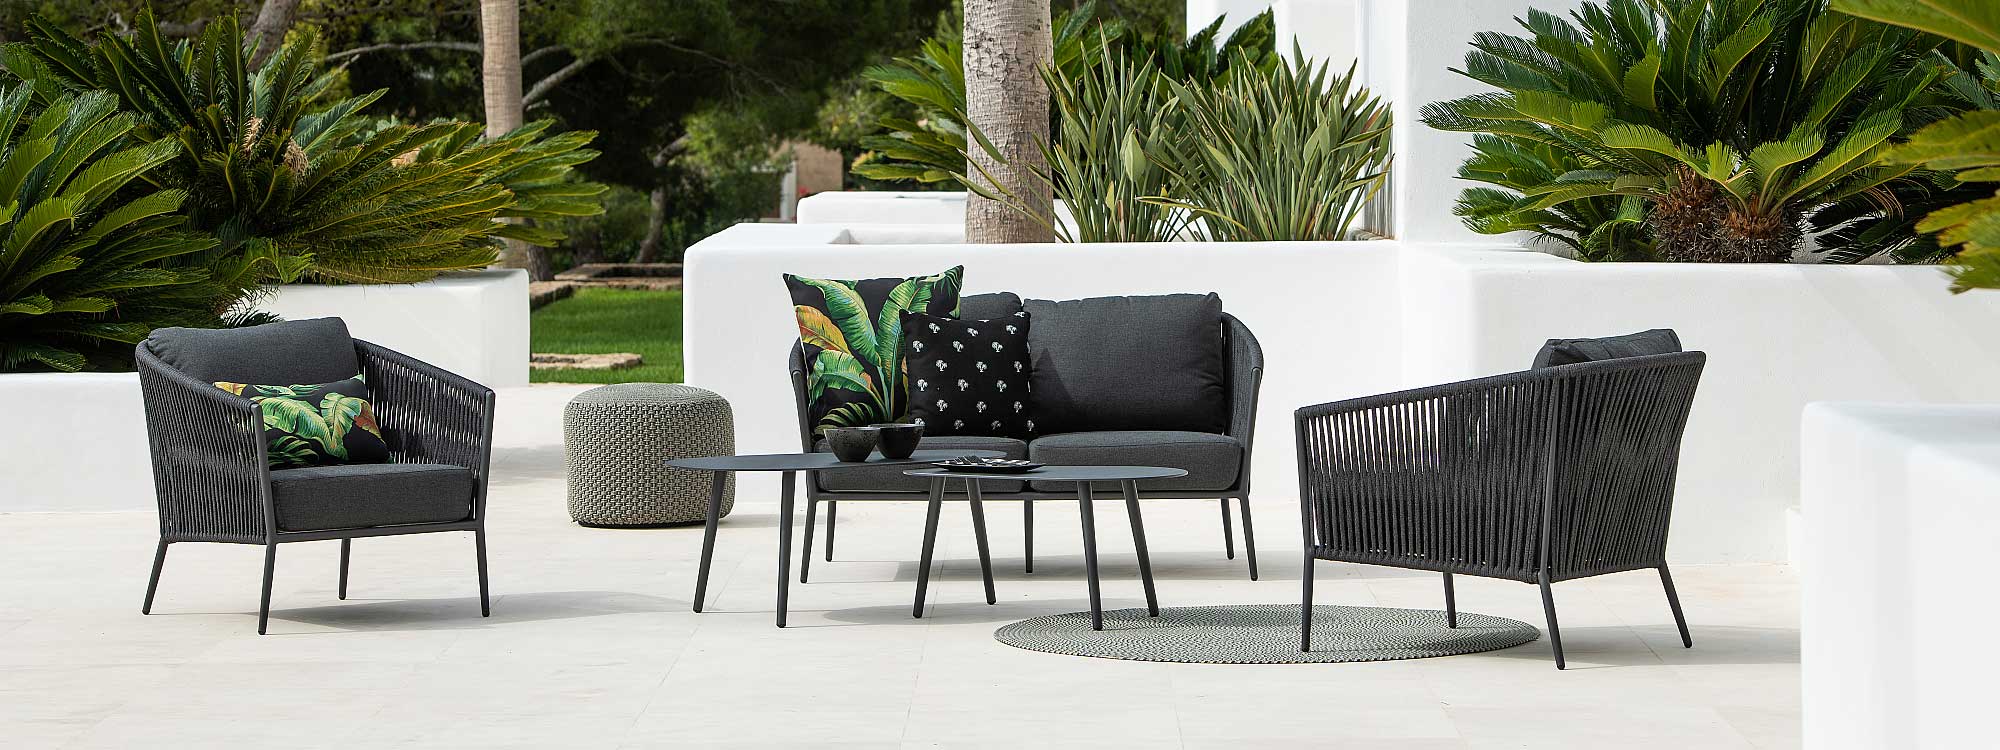 Fortuna Rope lounge furniture & modern outdoor lounge set has a 2 seat garden sofa & easy chair by Jati & Kebon elegant outdoor furniture.